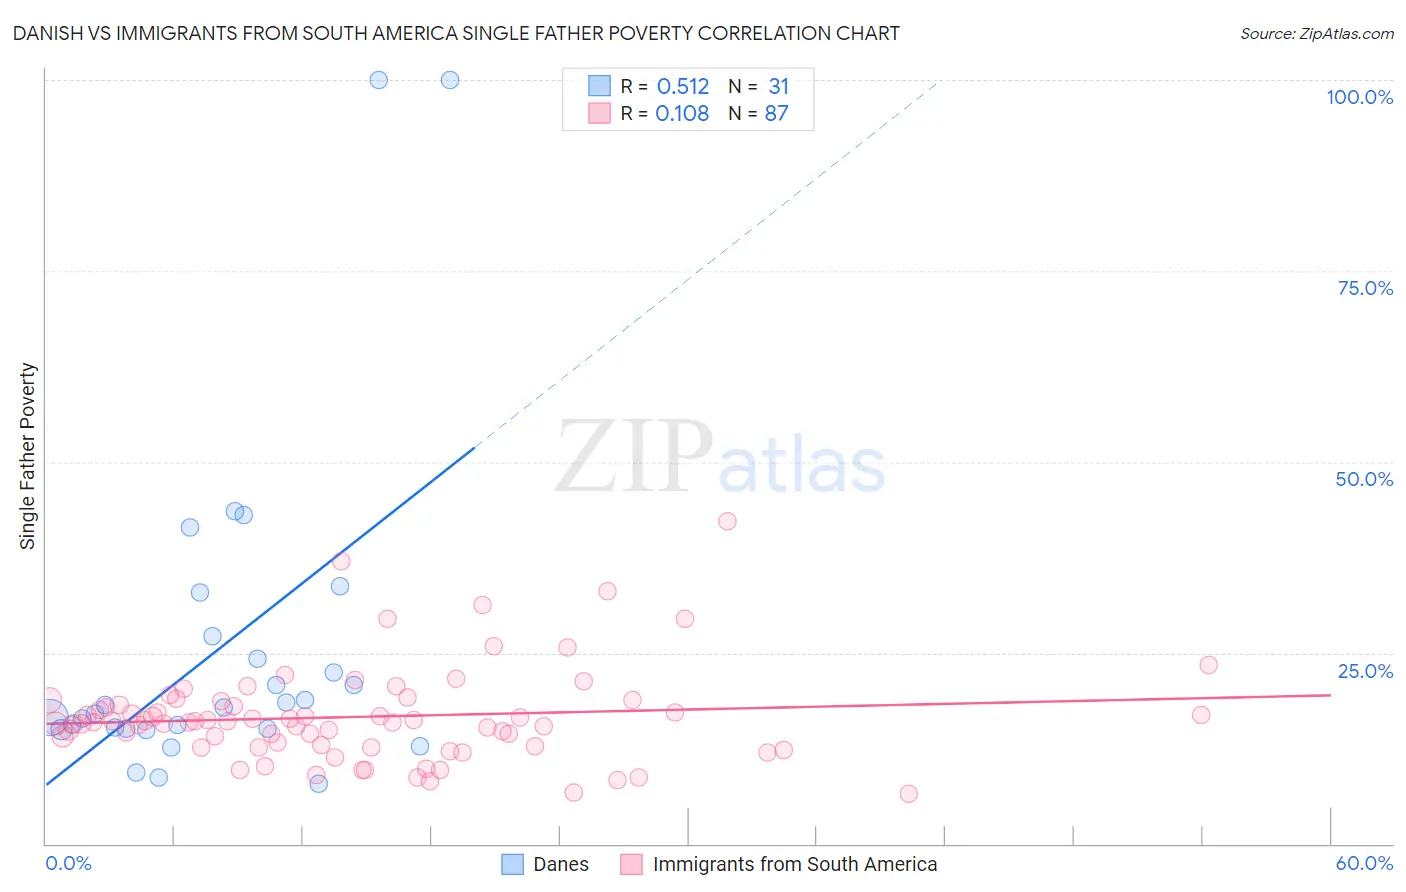 Danish vs Immigrants from South America Single Father Poverty